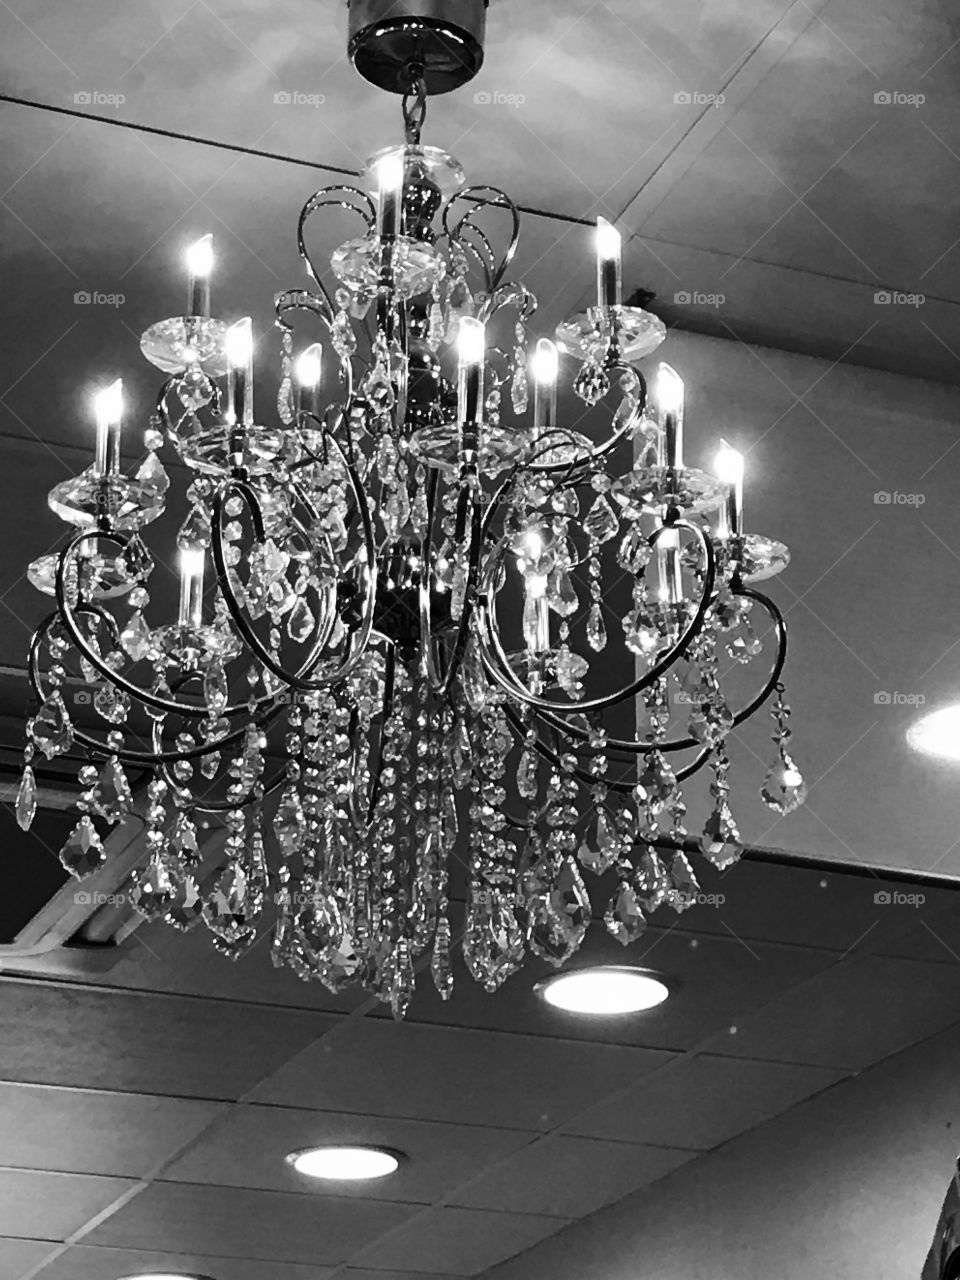 Chandeliers-light-ceiling-